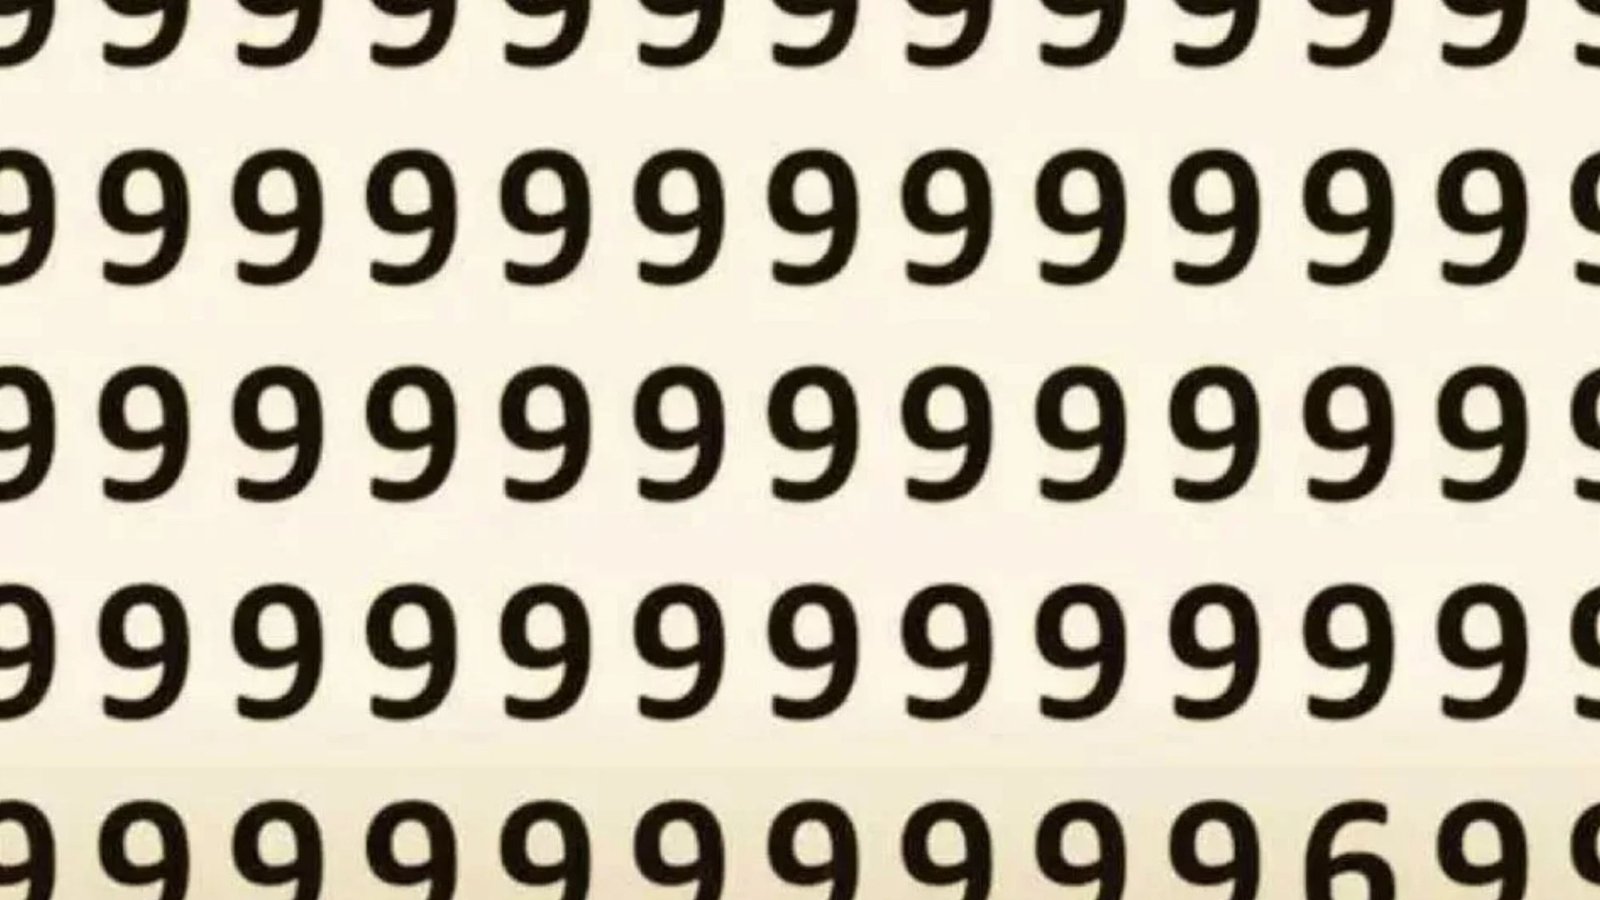 You have 20/20 vision if you can spot the odd number in this sequence of 9s in under seven seconds